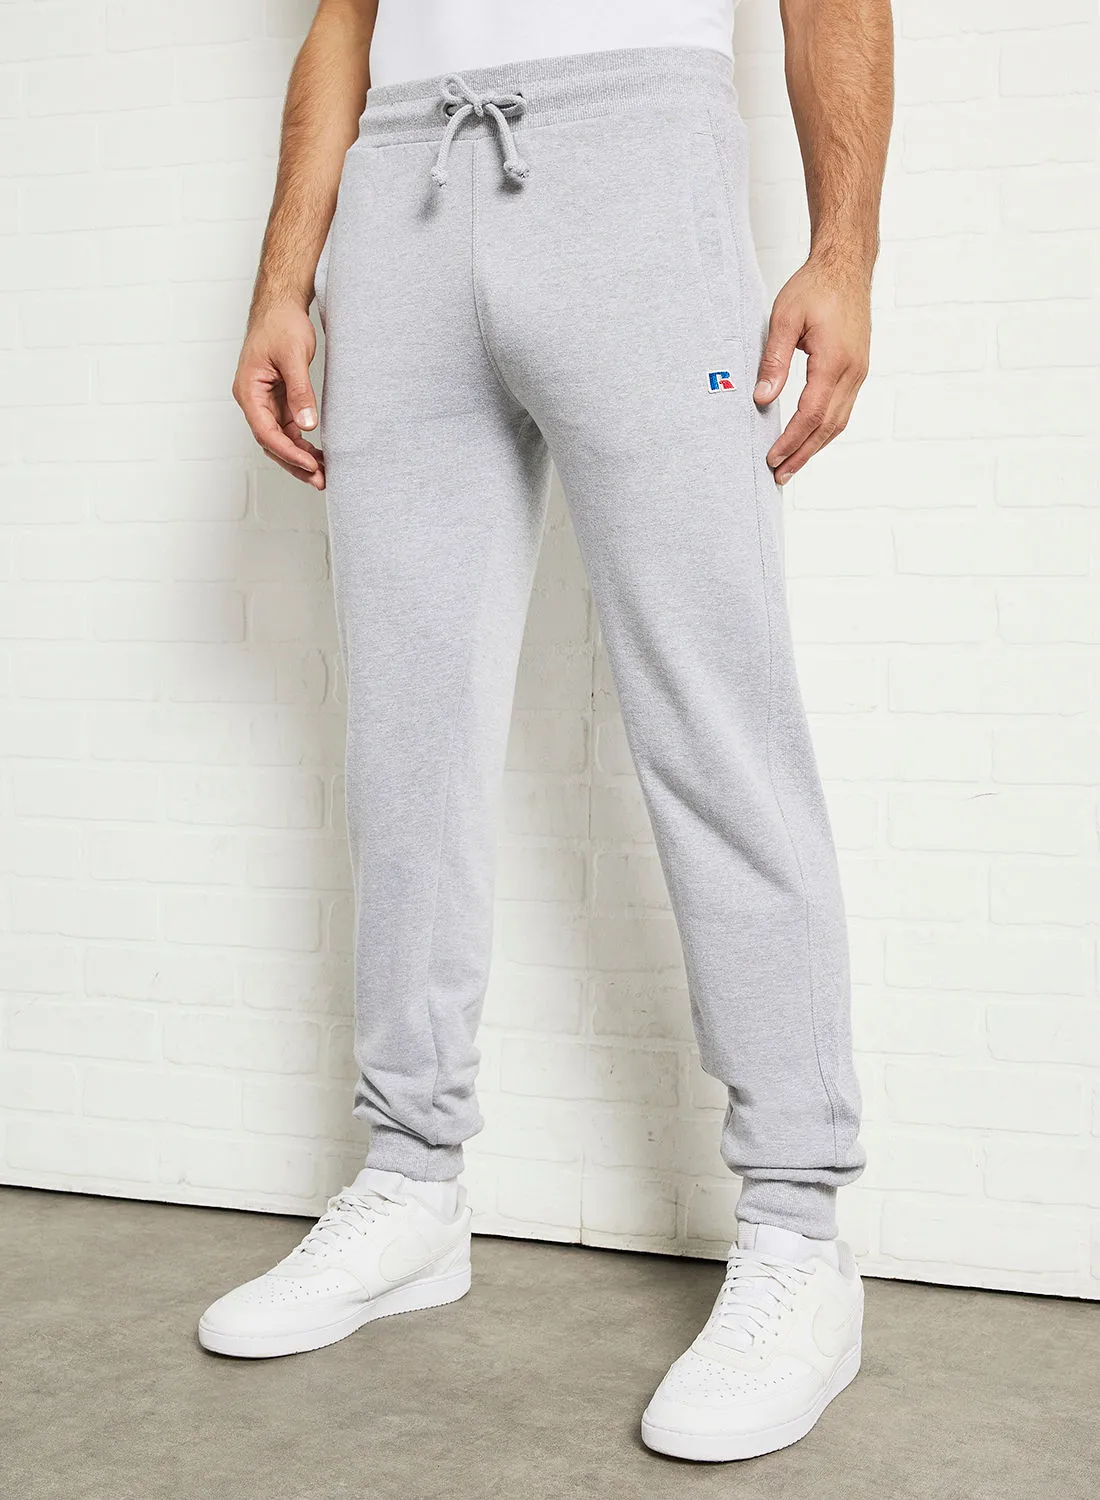 Russell Athletic Embroidered Logo Sweatpants Grey